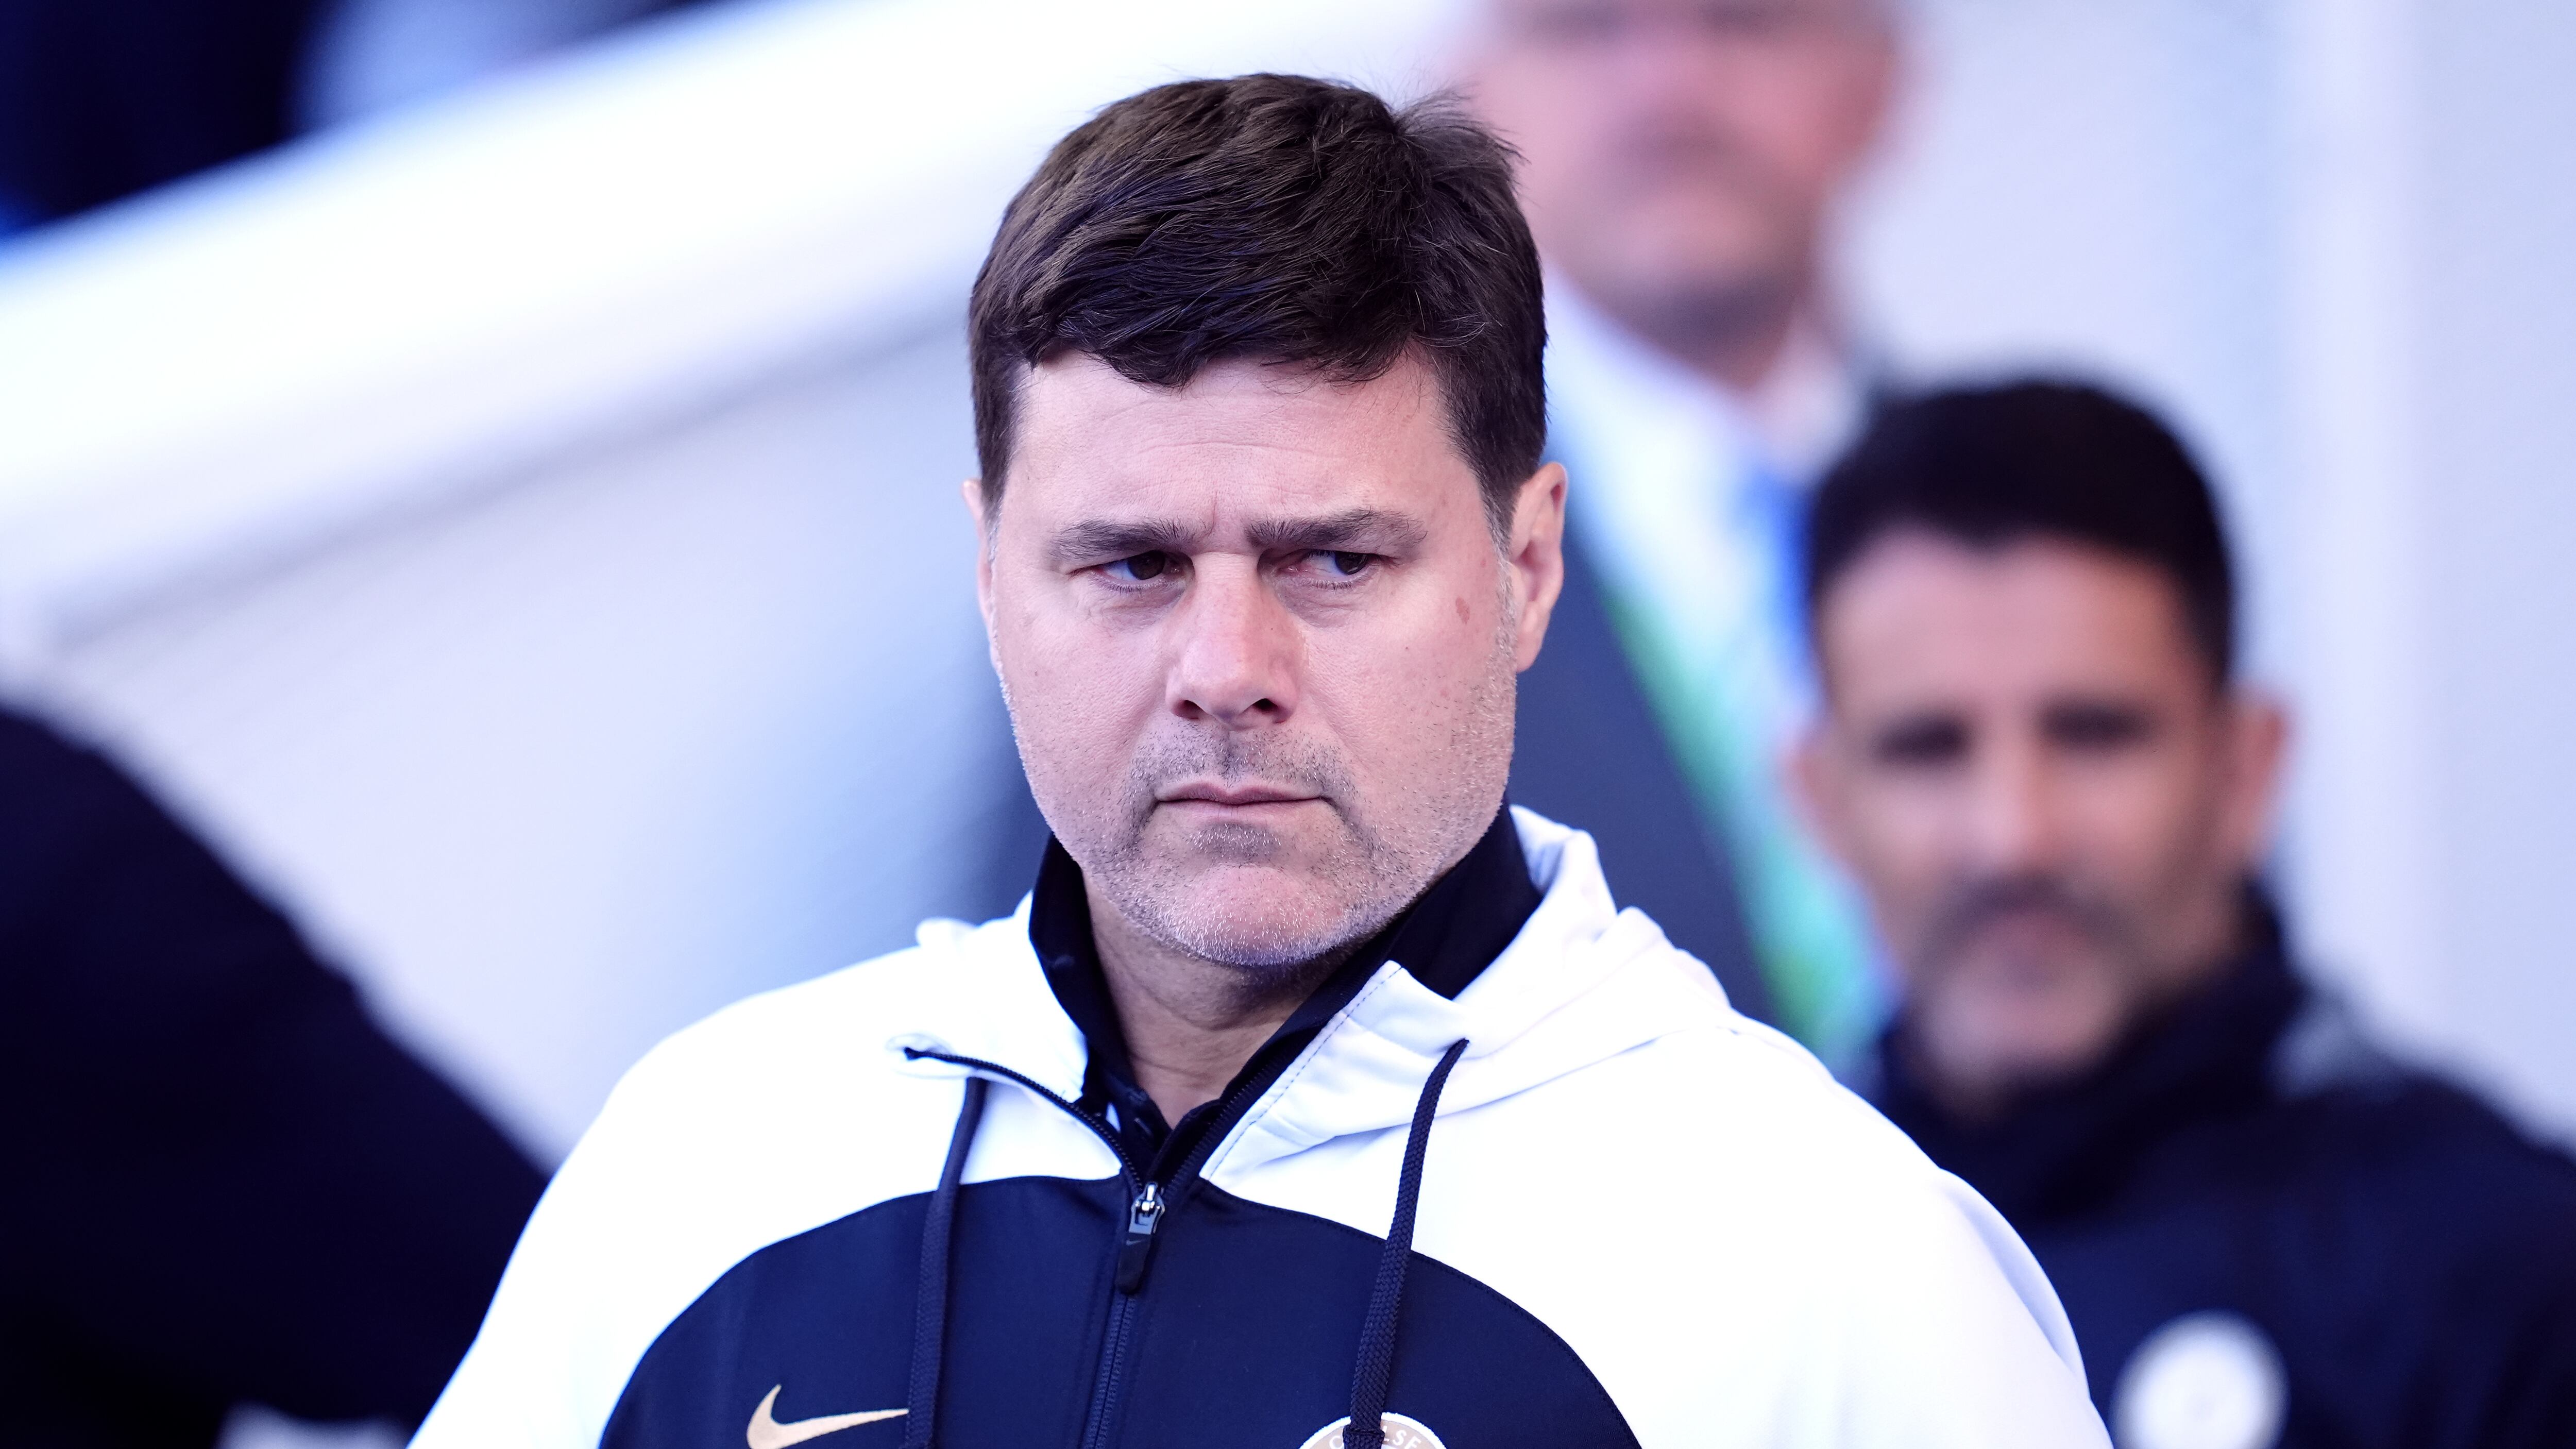 Mauricio Pochettino is looking to next season after Chelsea’s strong finish